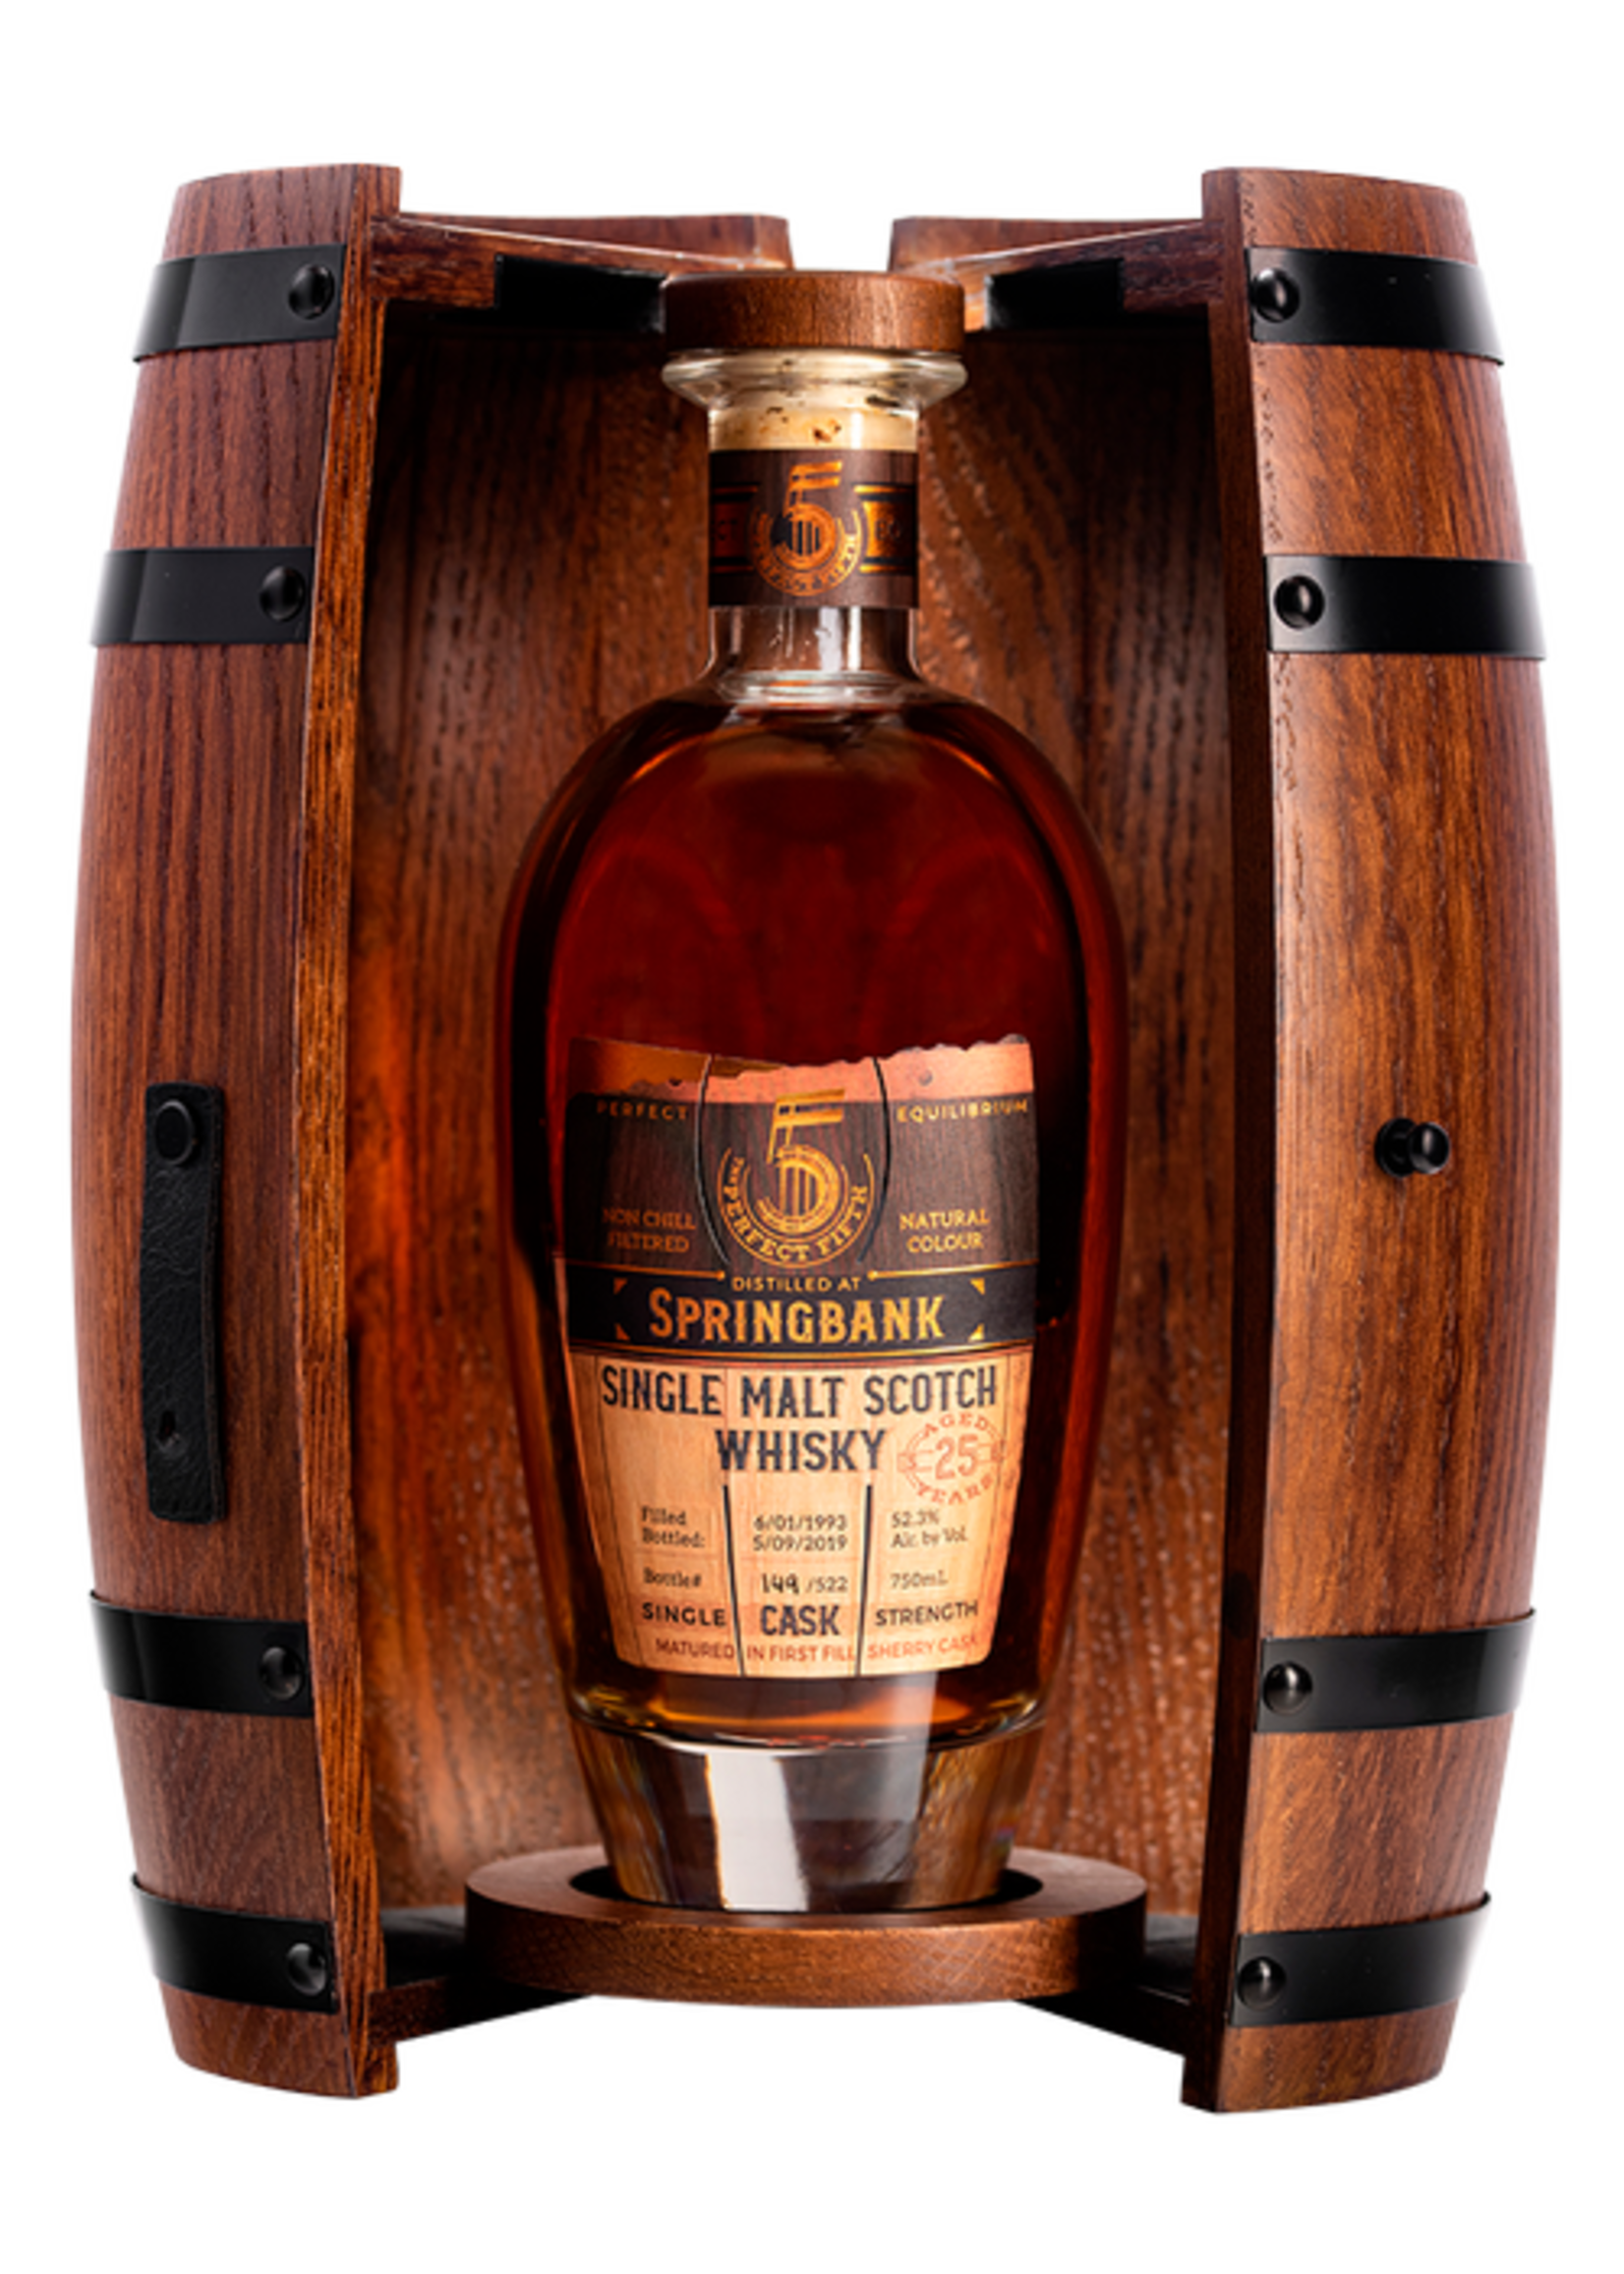 Perfect Fifth The Perfect Fifth / Springbank 25 Year Single Cask Scotch Whisky 52.3% abv / 750mL